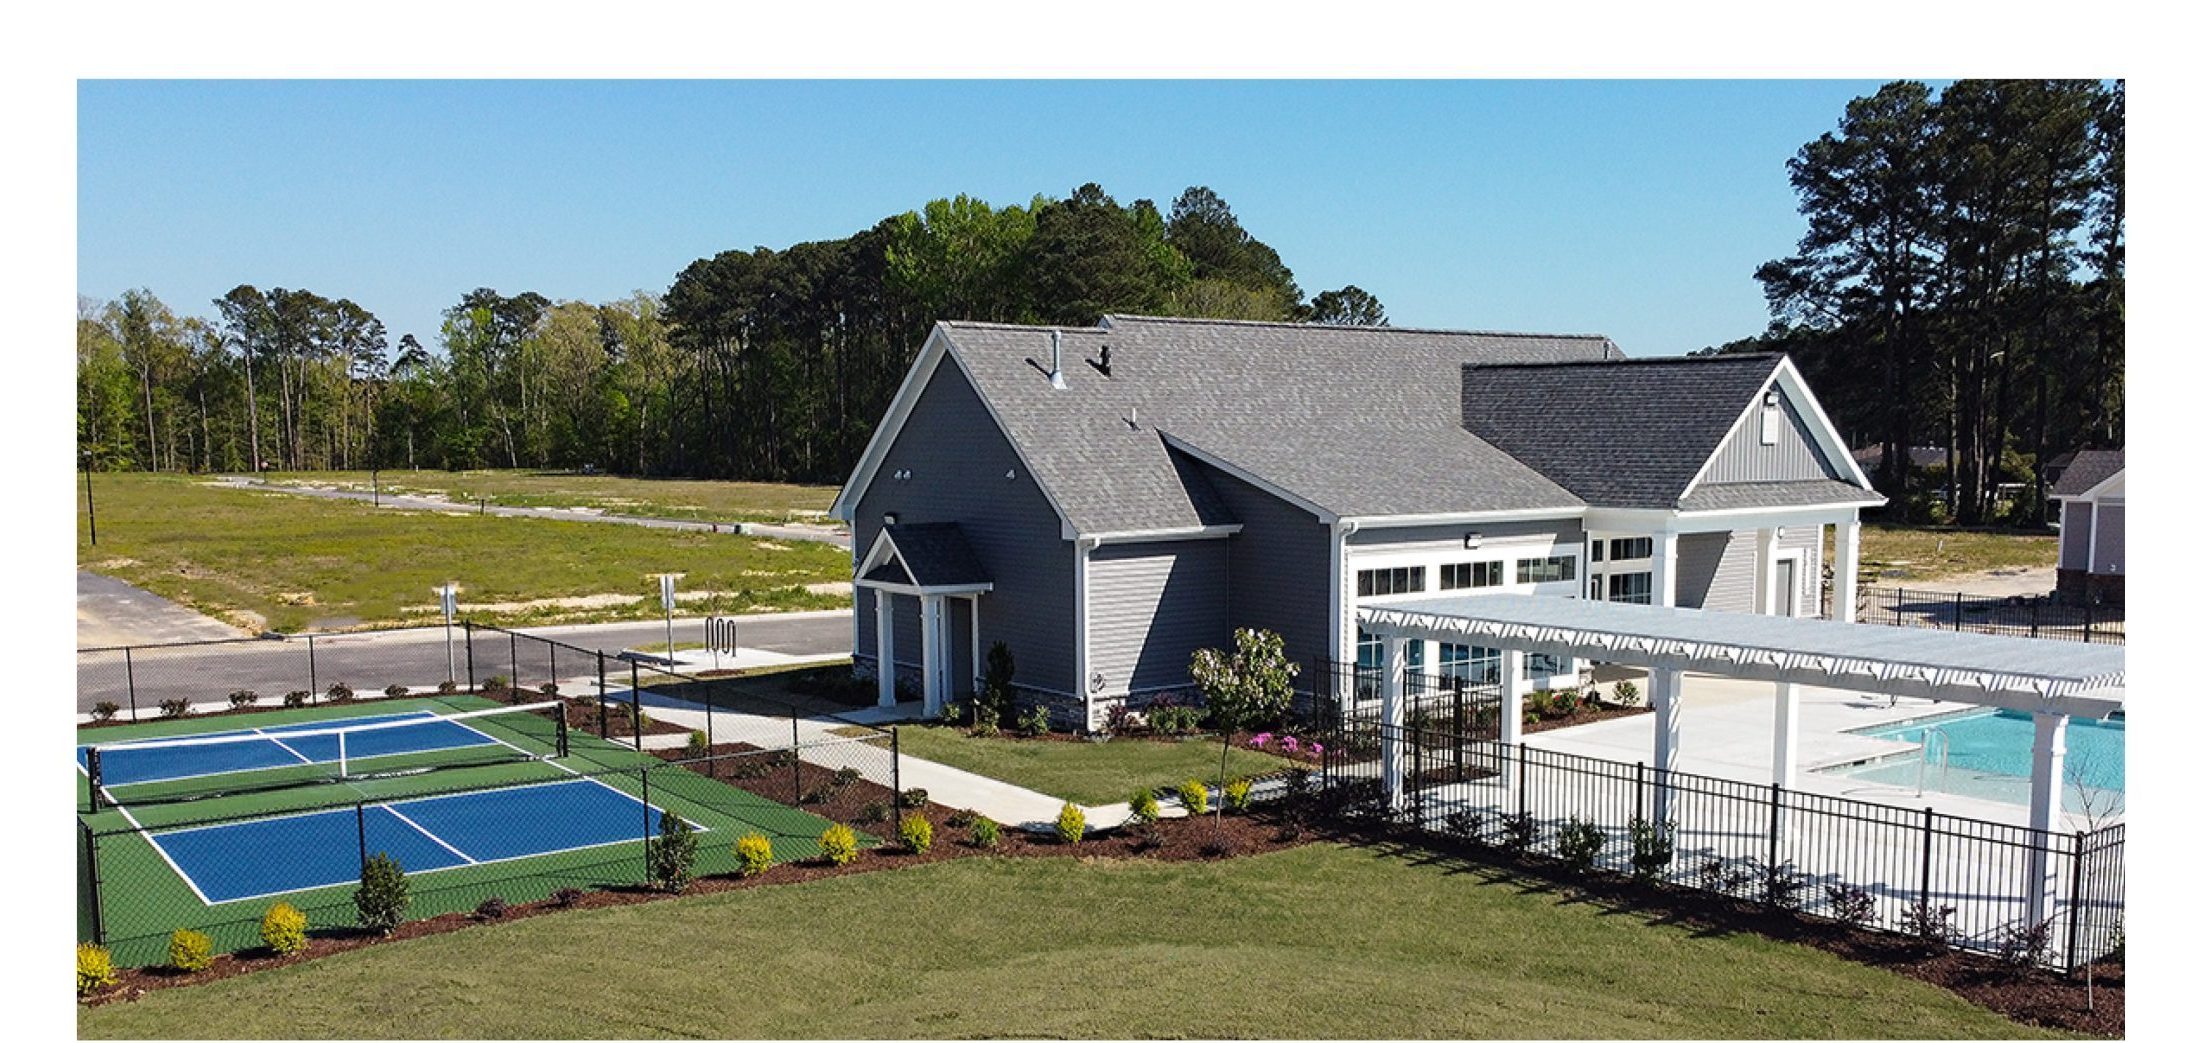 Image of the clubhouse, pickleball court and part of the pool at the Vineyards at Hallstead Reserve